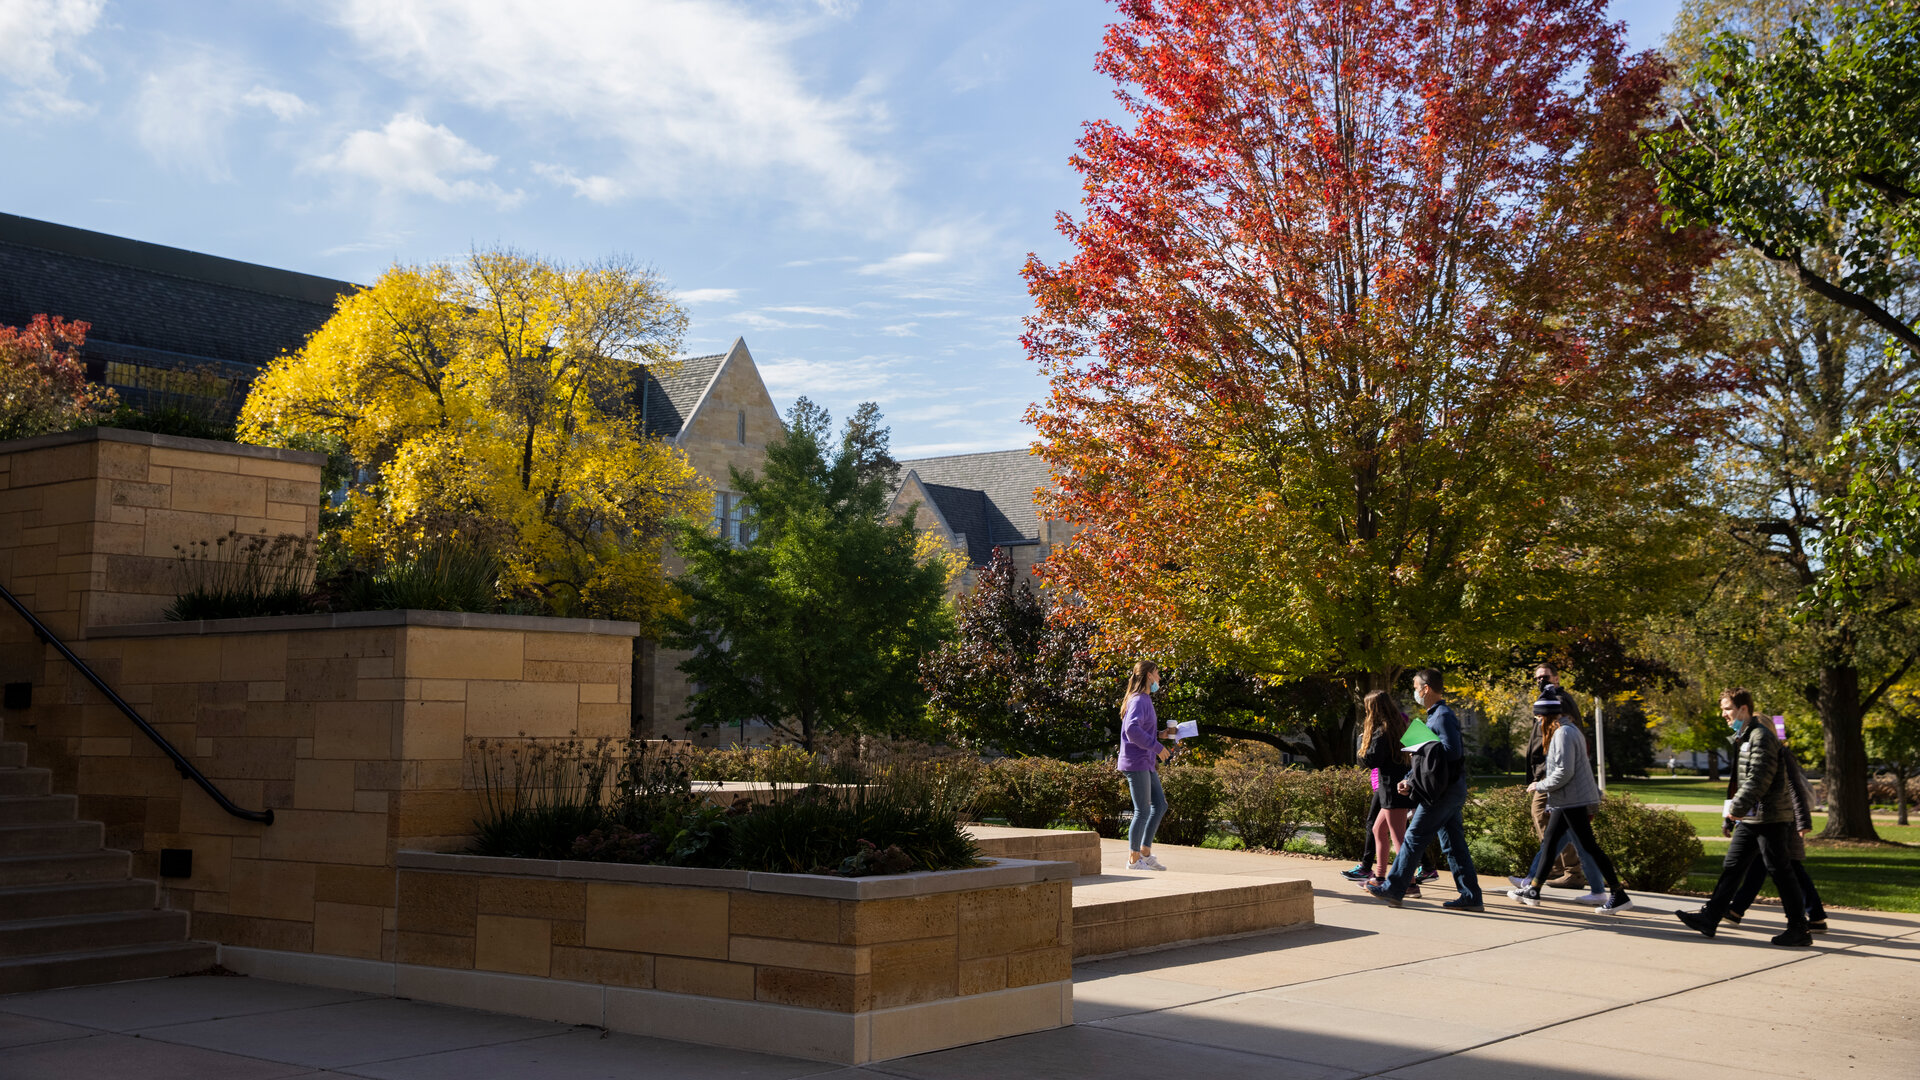 Students walk on campus in the fall